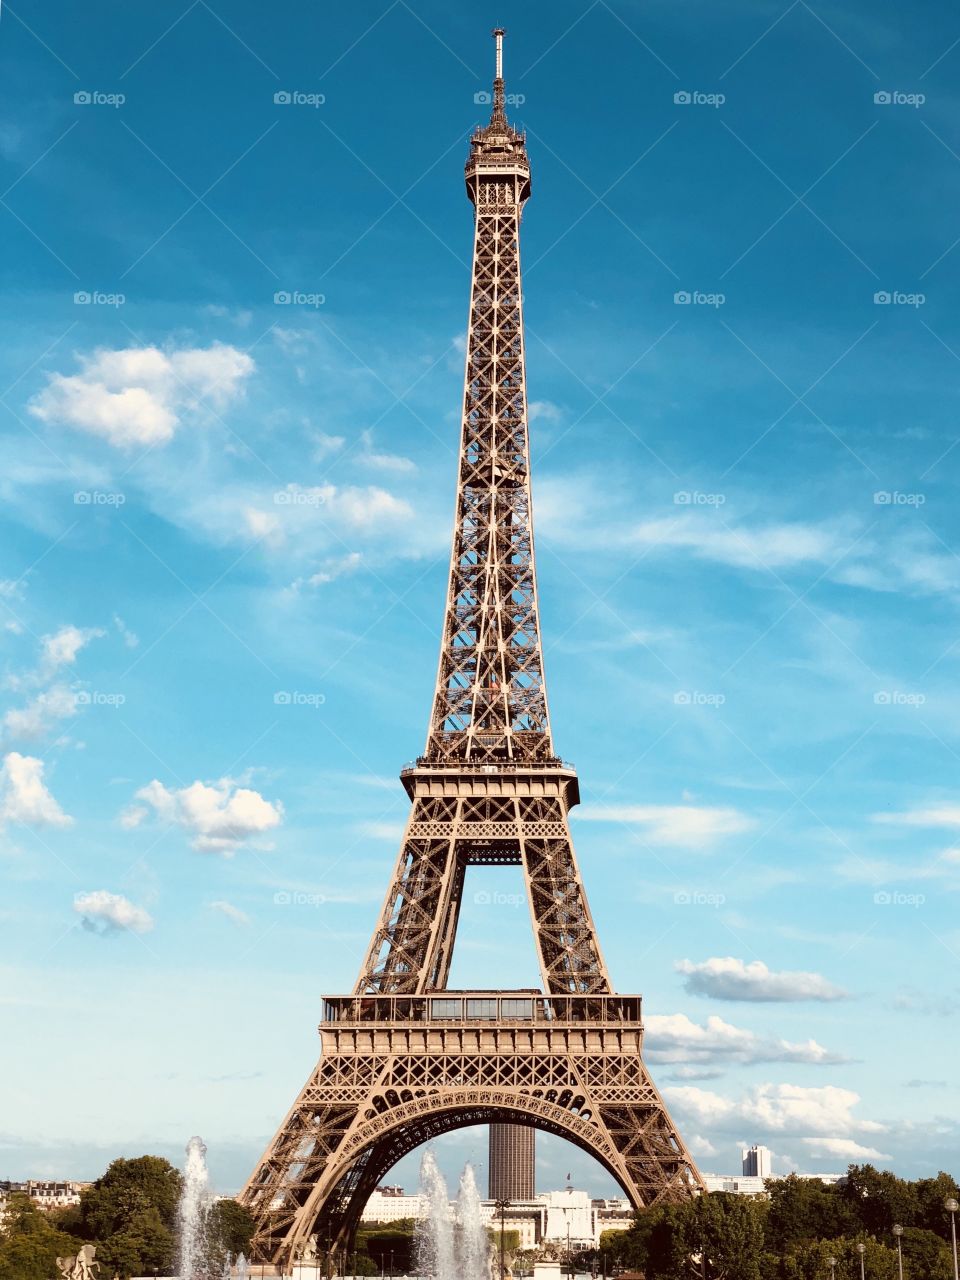 a beautiful scenery of the Eiffel Tower in June. Cloudy and nicely toned. 